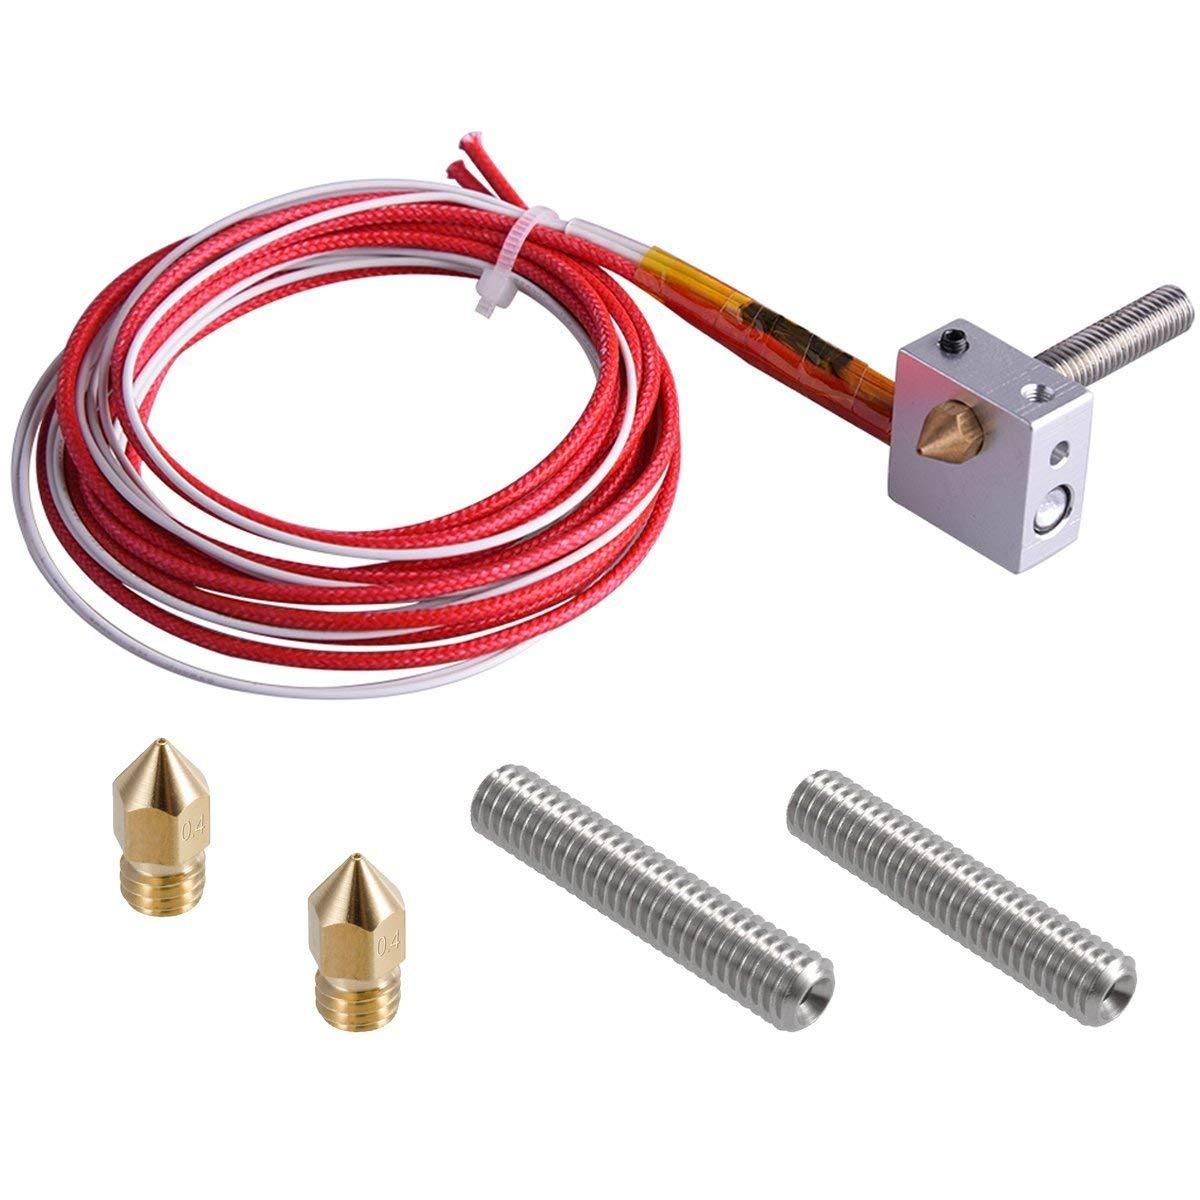 

12V 1.75mm Filament Direct Feed Hot End Assembled Extruder Kit with 2Pcs Extruder & 0.4mm Brass Nozzle